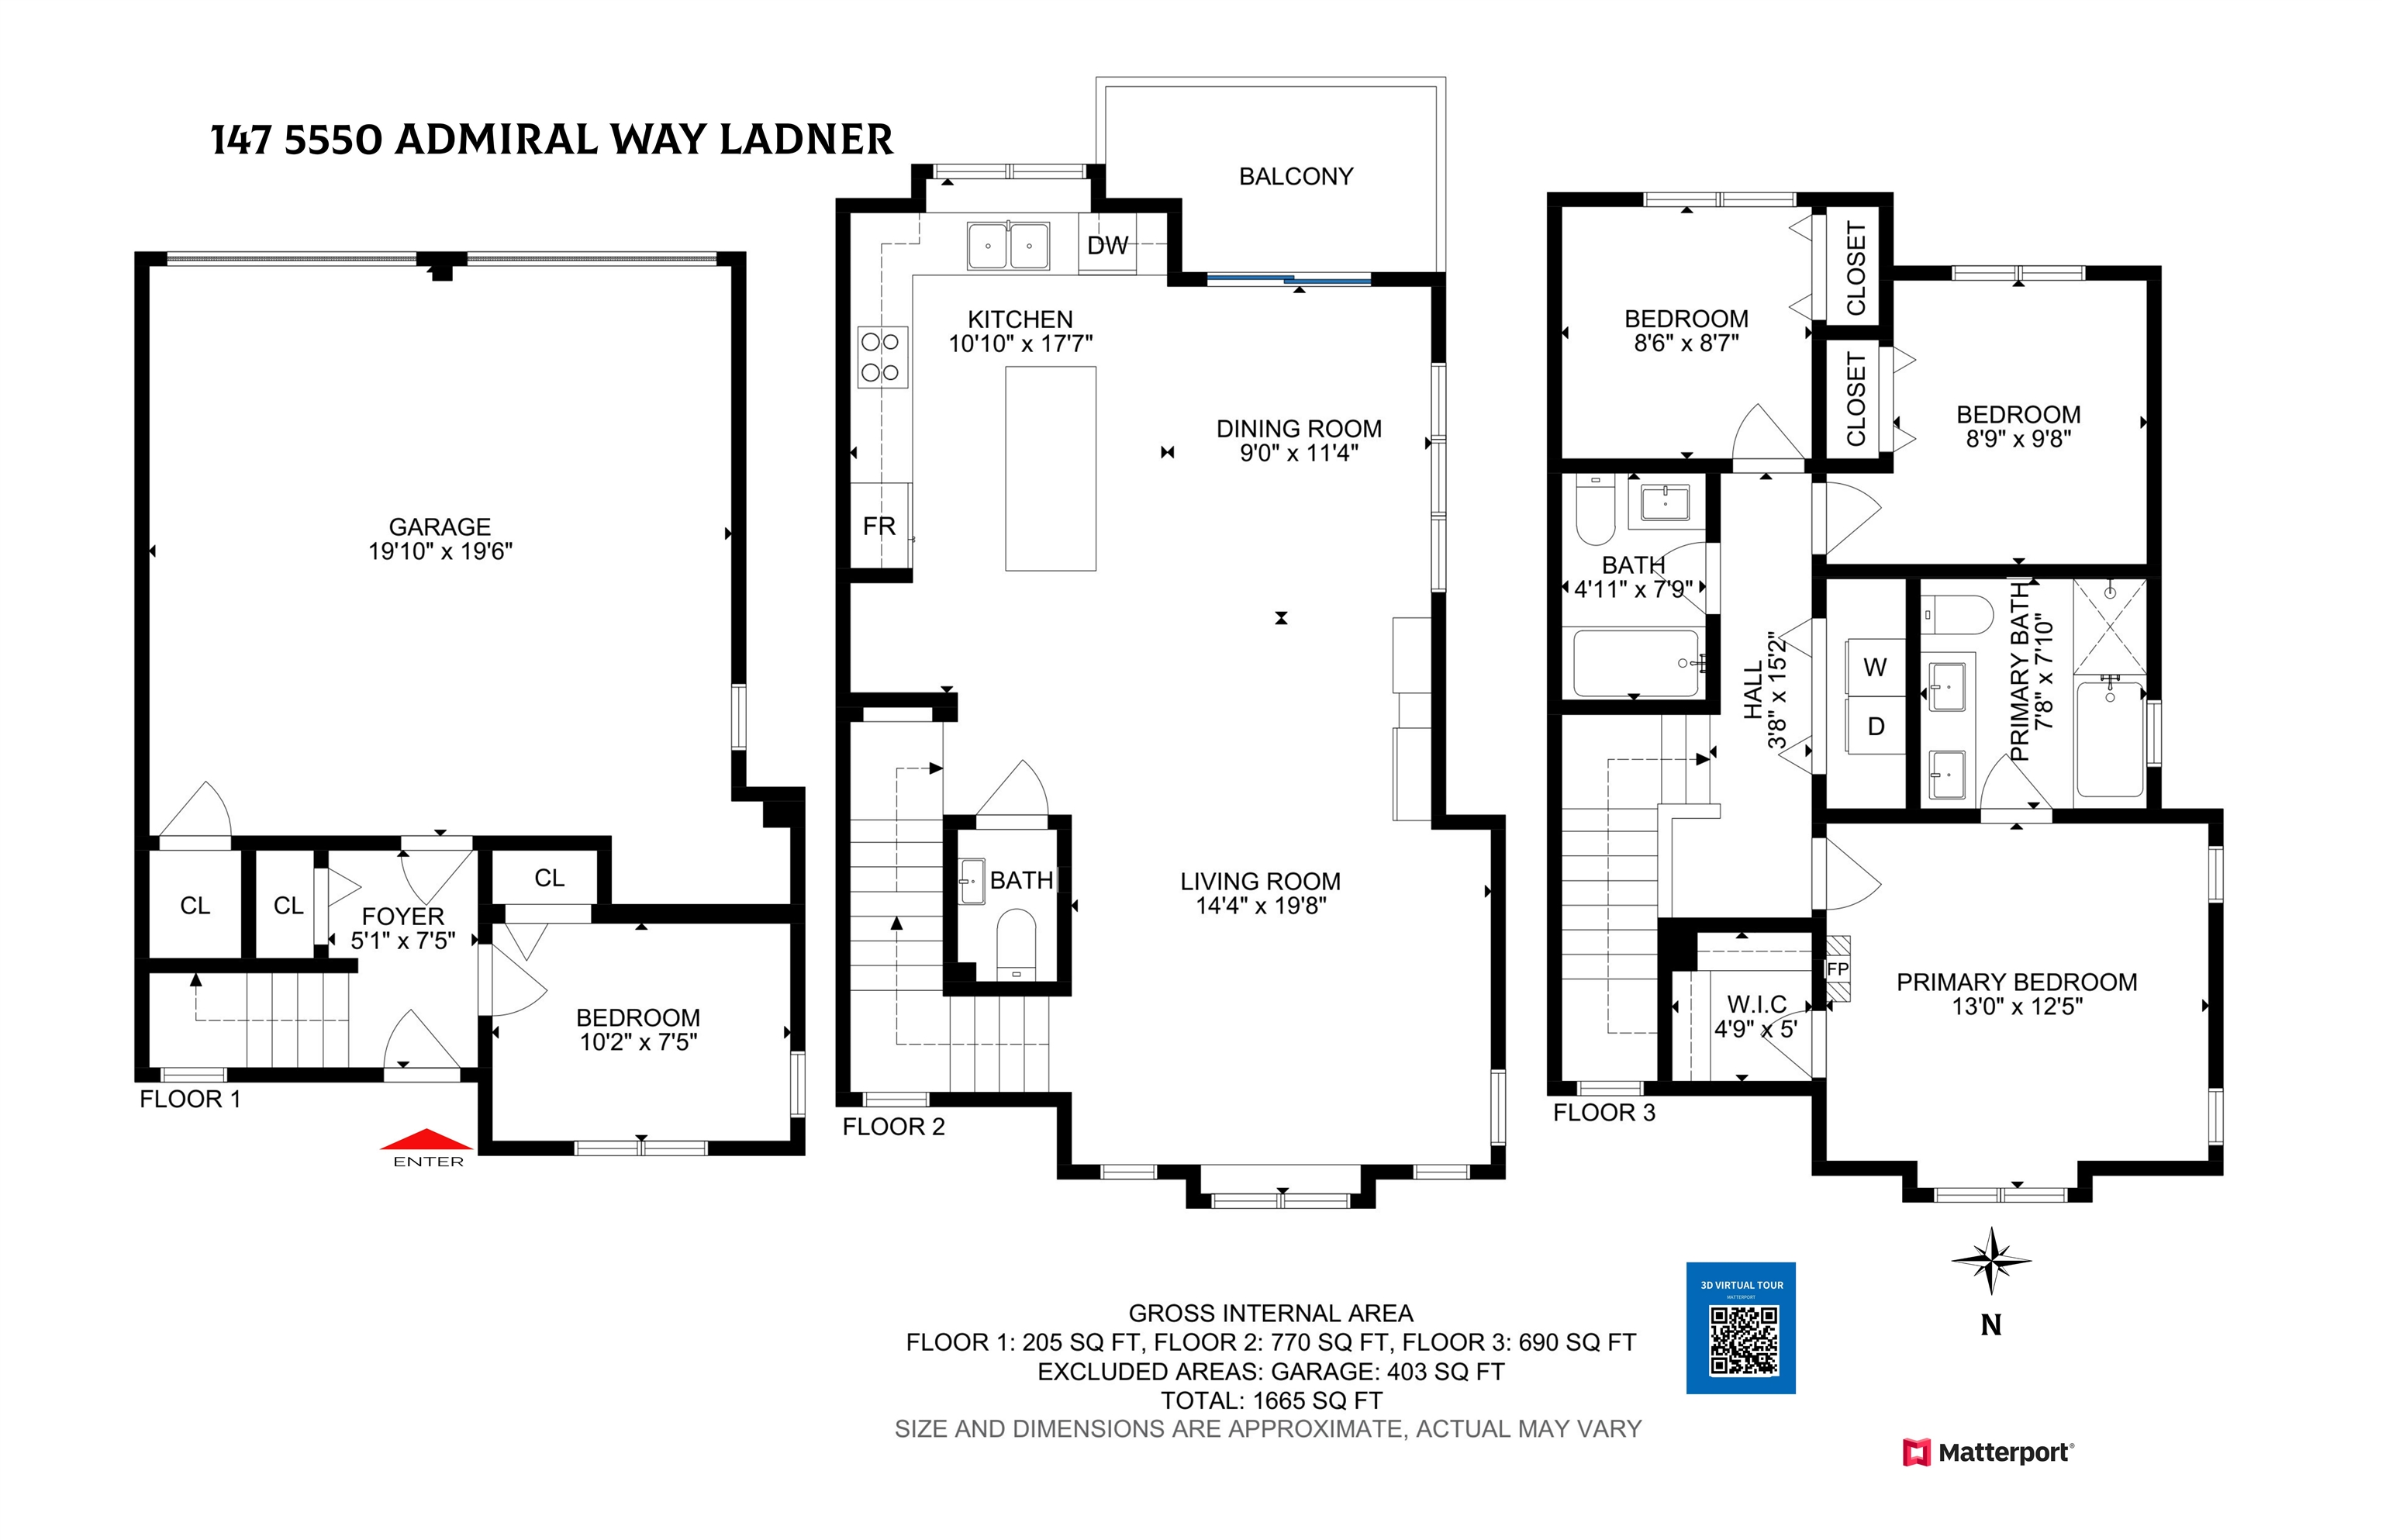 Listing image of 147 5550 ADMIRAL WAY